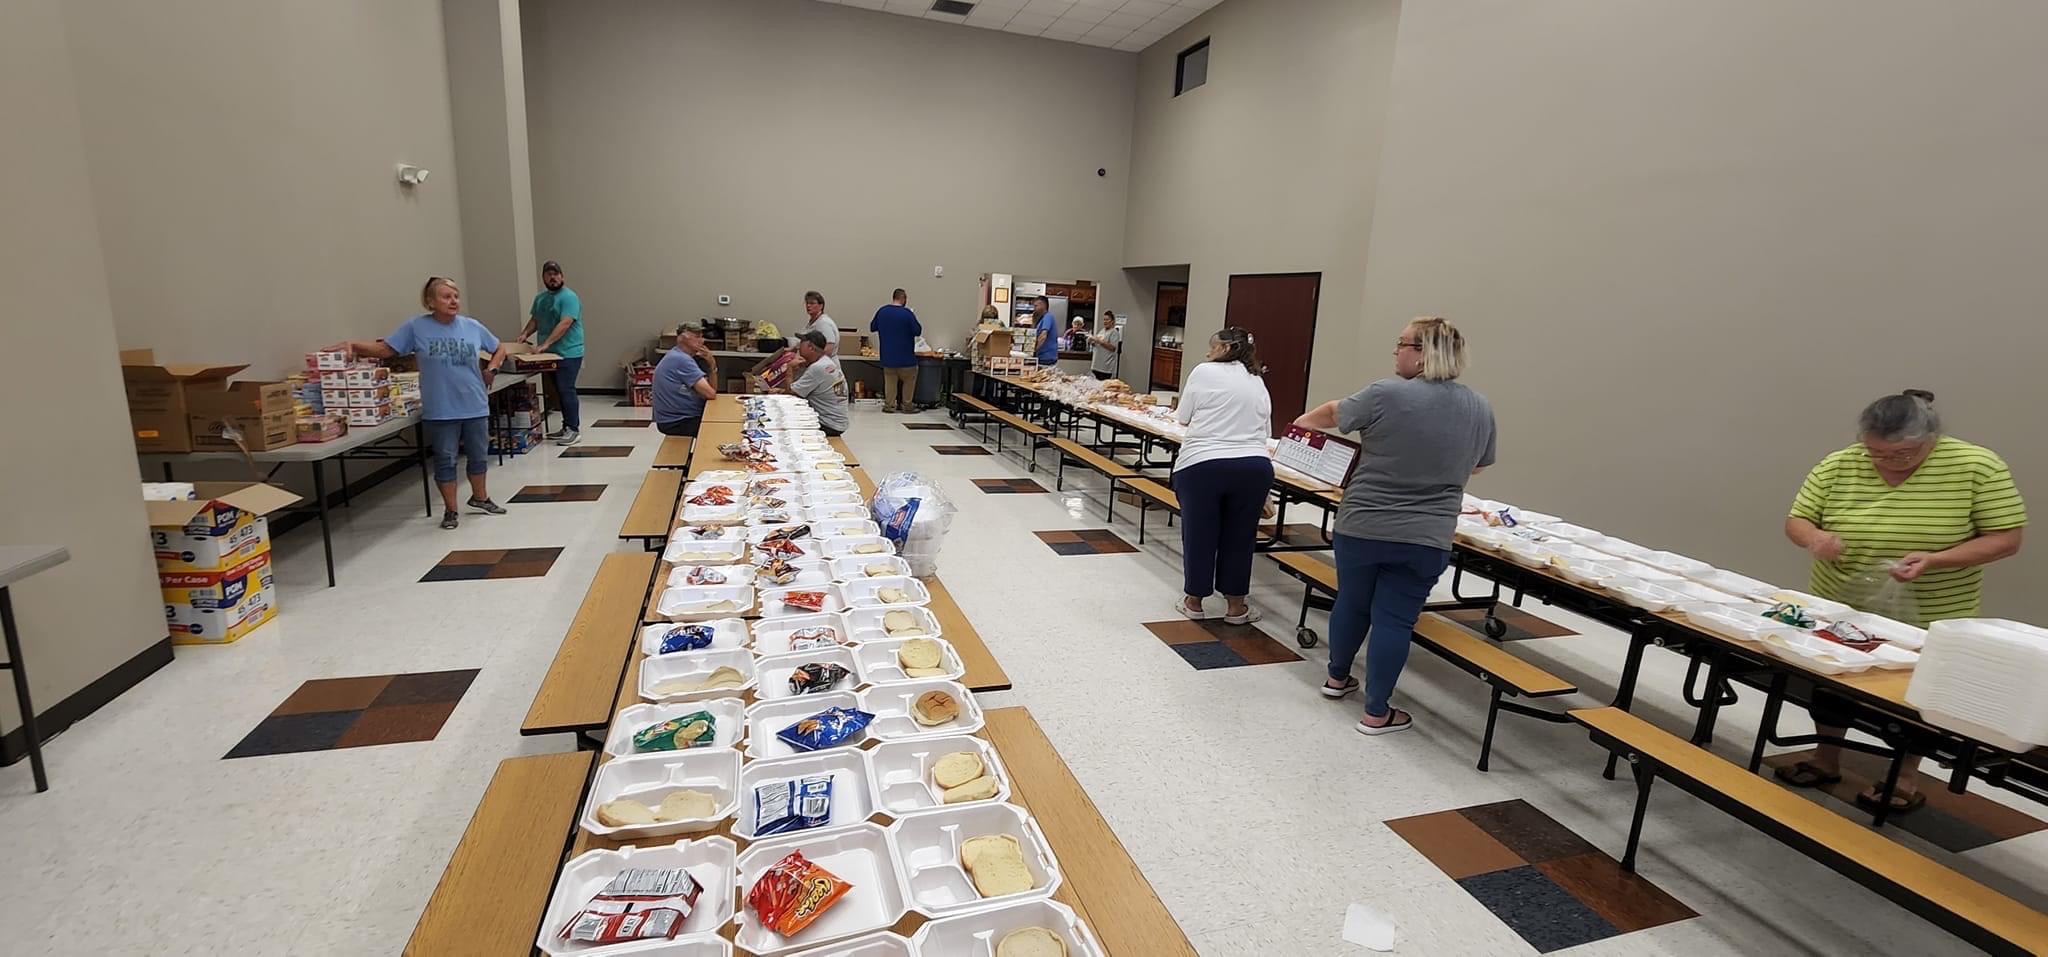 An assembly line of tables covered in meals